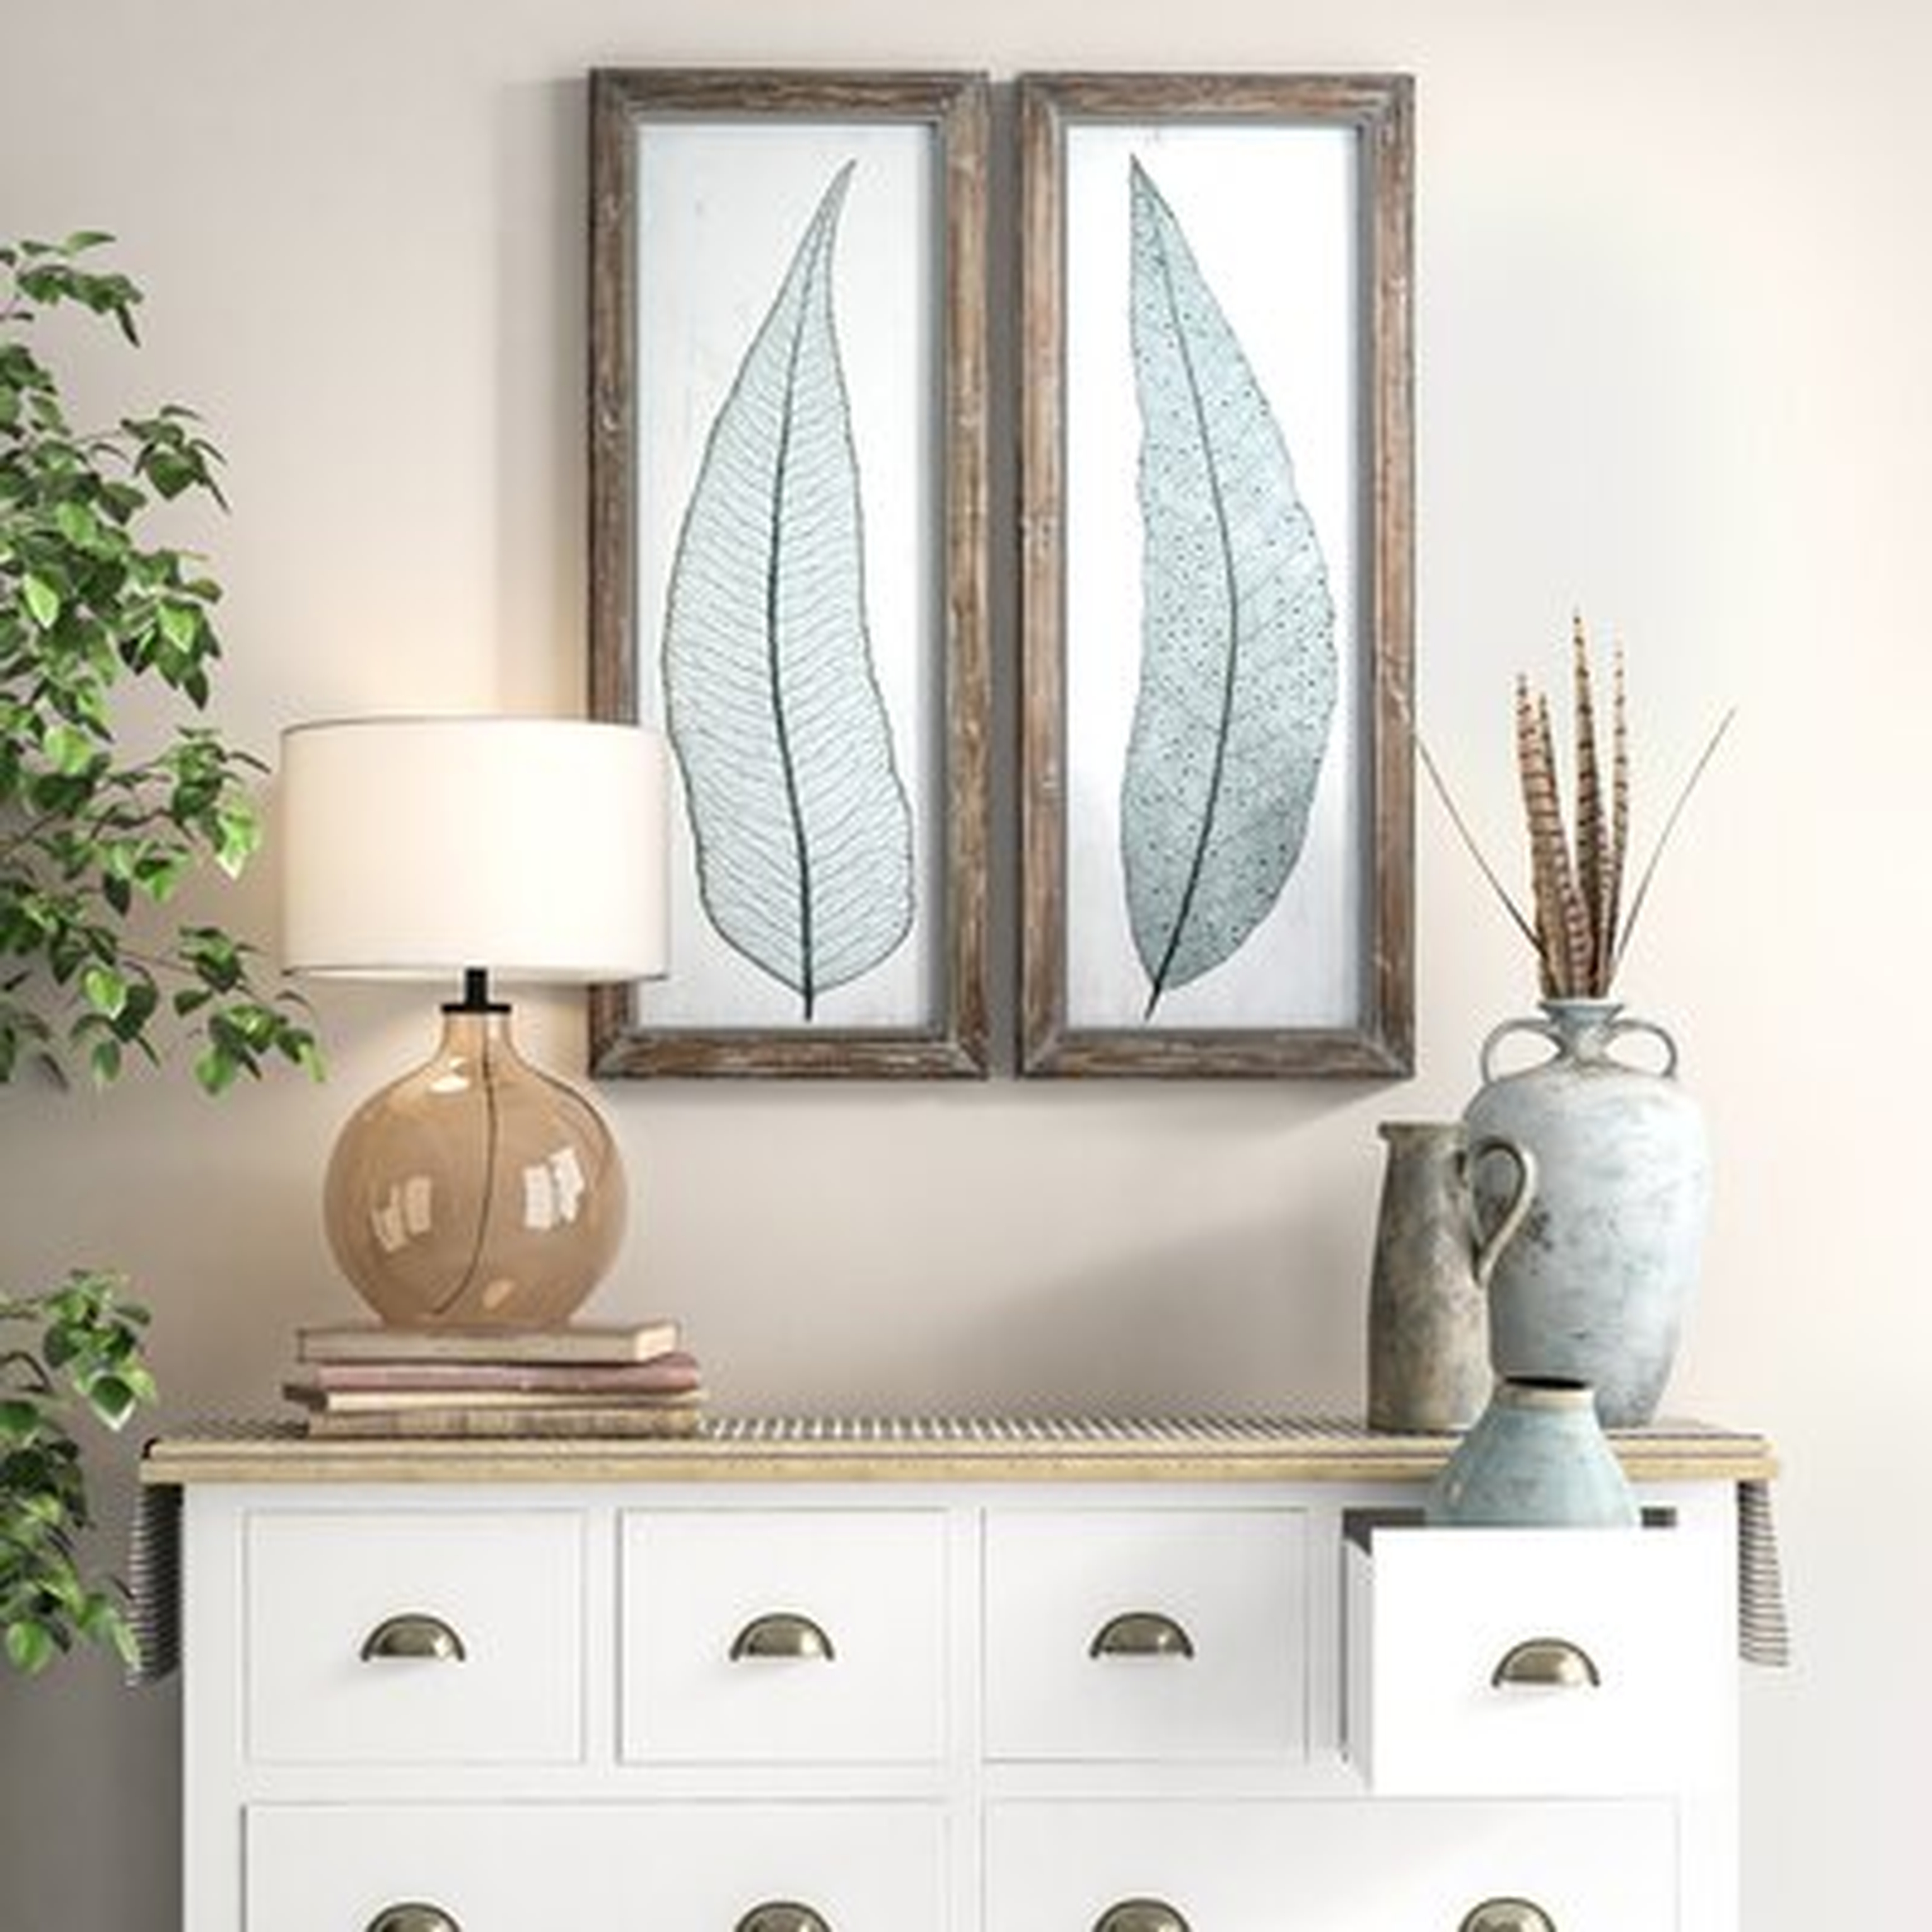 'Tall Leaves' 2 Piece Picture Frame Print Set - Birch Lane